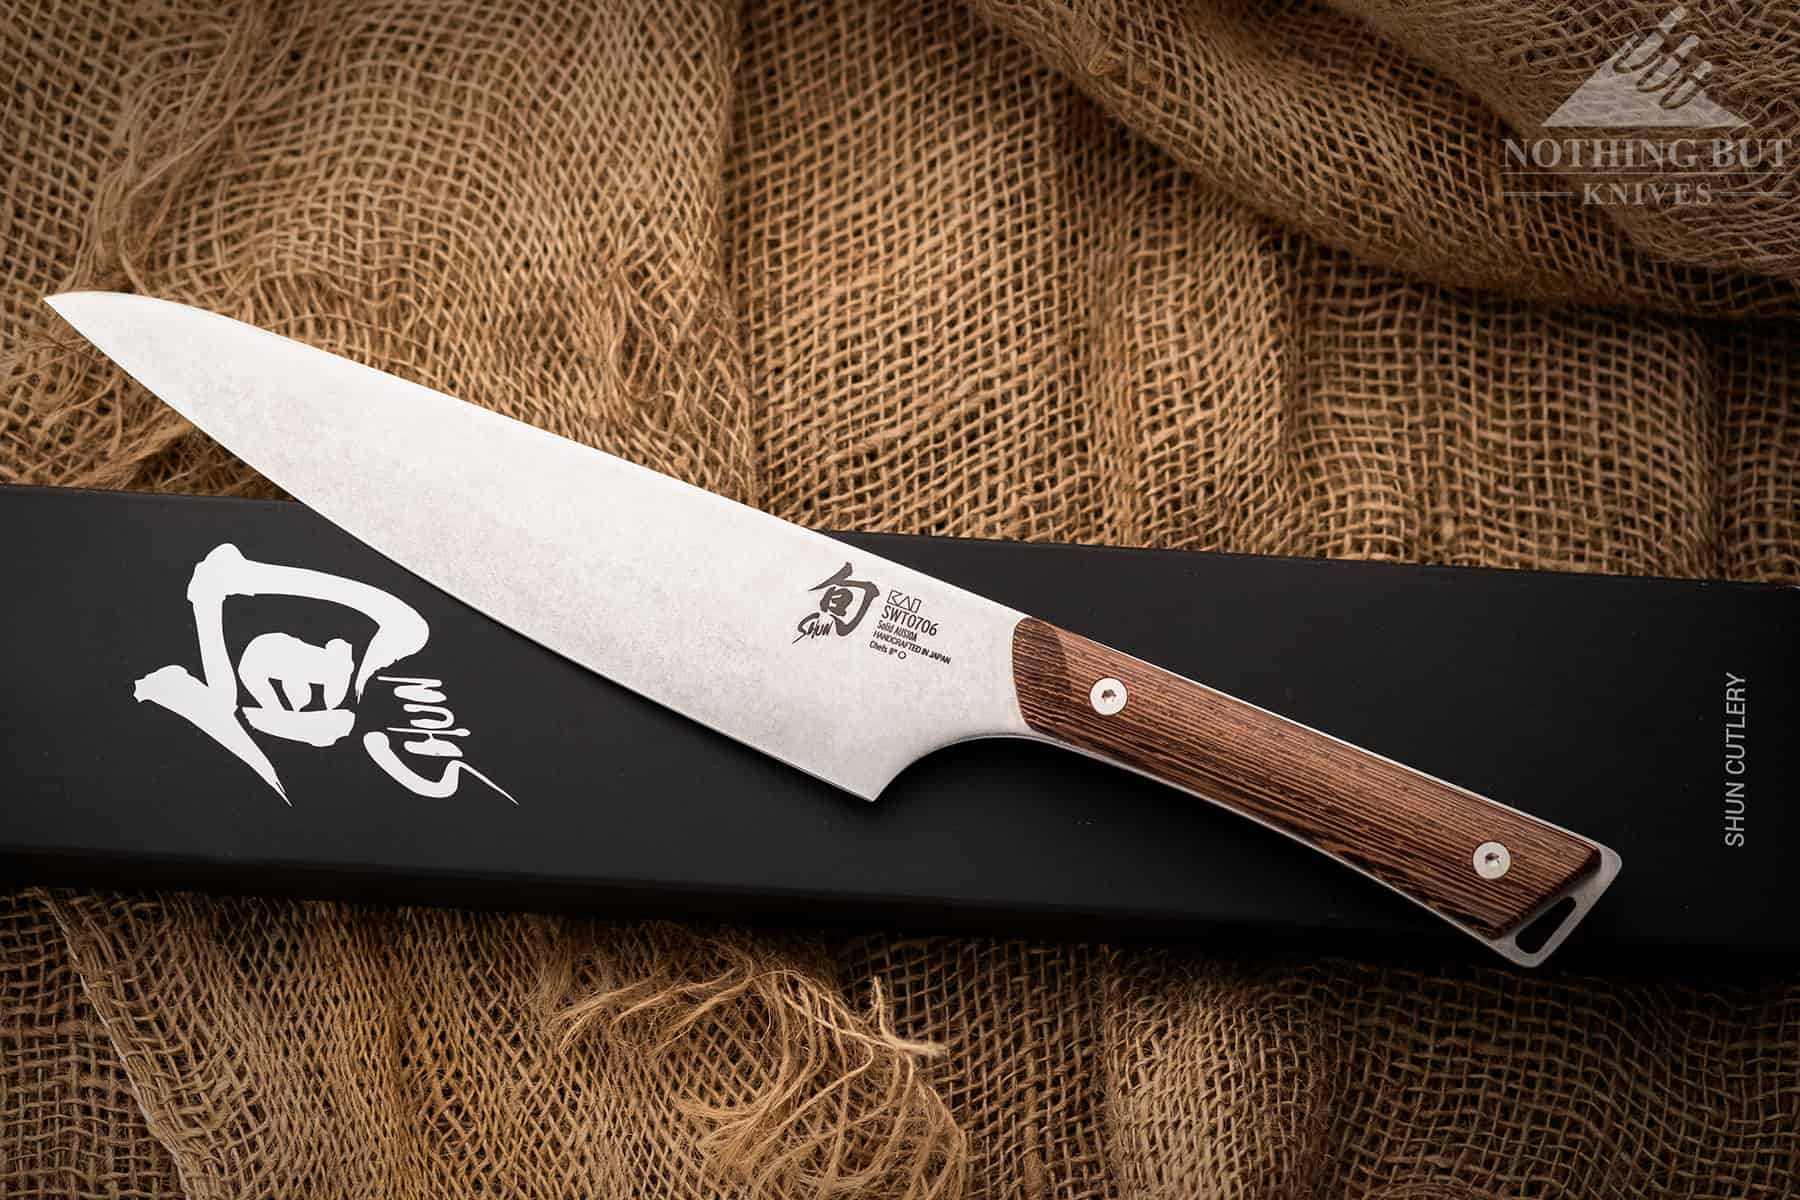 Shun designed the Kanso chef knife with a retro look and feel. 